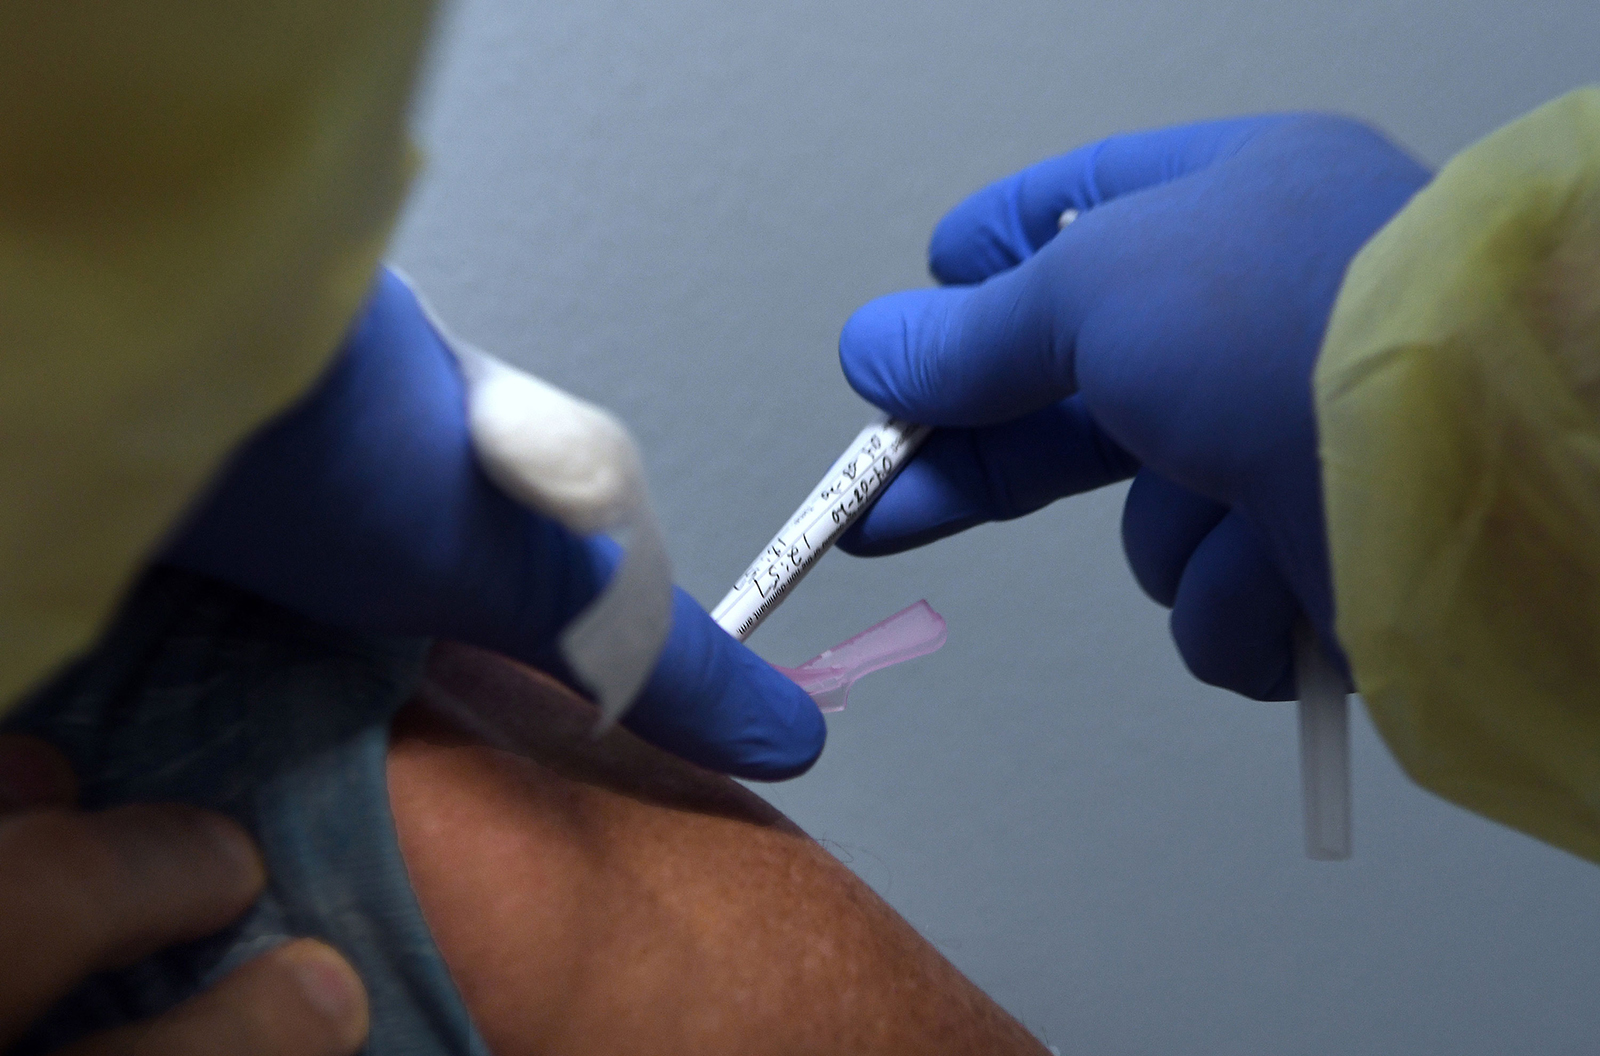 A volunteer receives his first injection as a participant in a Phase 3 Covid-19 vaccine clinical trial sponsored by Moderna at Accel Research Sites on Aug. 4, in DeLand, Florida.